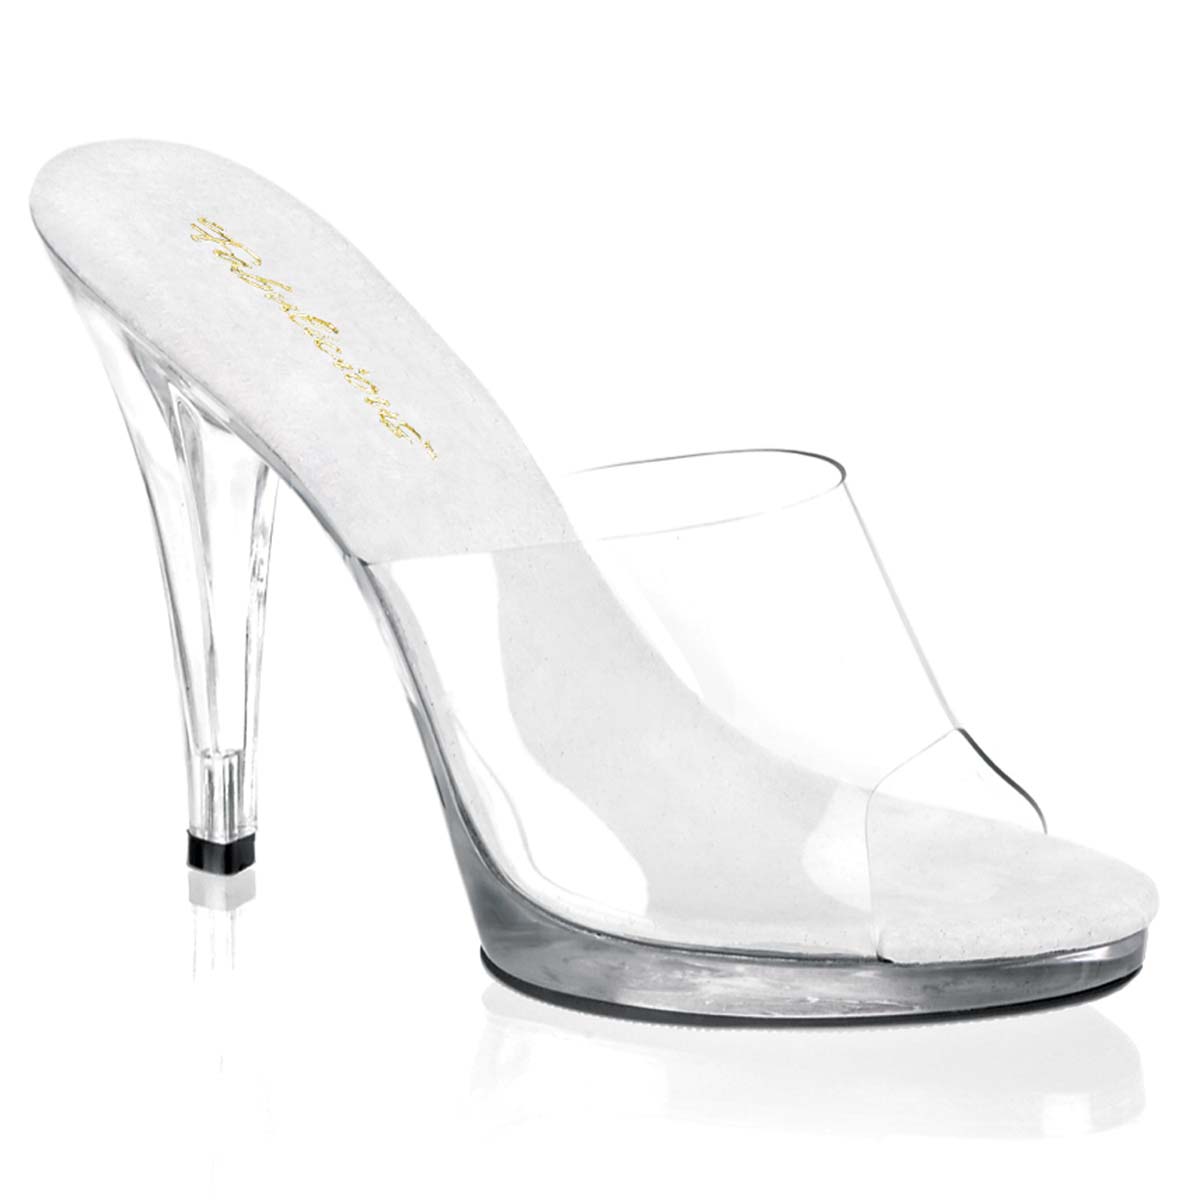 Pleaser Flair-401 - Clear/Clear in Sexy Heels & Platforms - $47.51